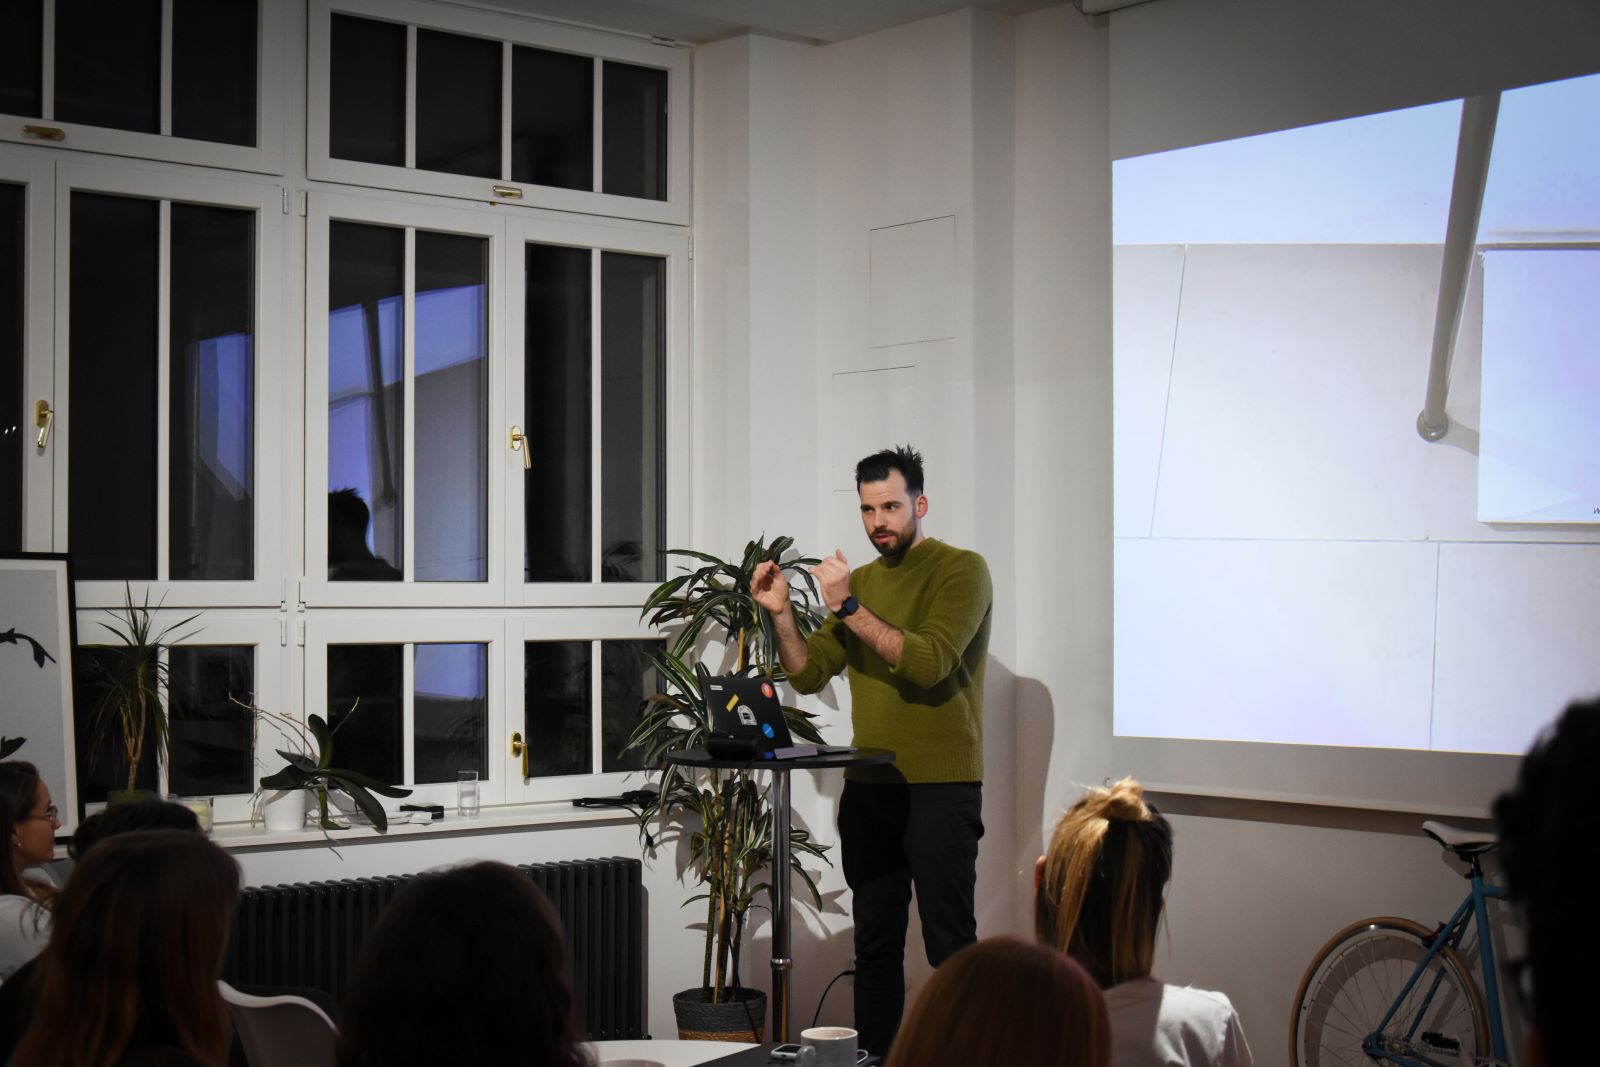 Niq wearing a green woolen sweater next to an indoor plant. He's on stage in front of a crowd gesturing next to the projector screen